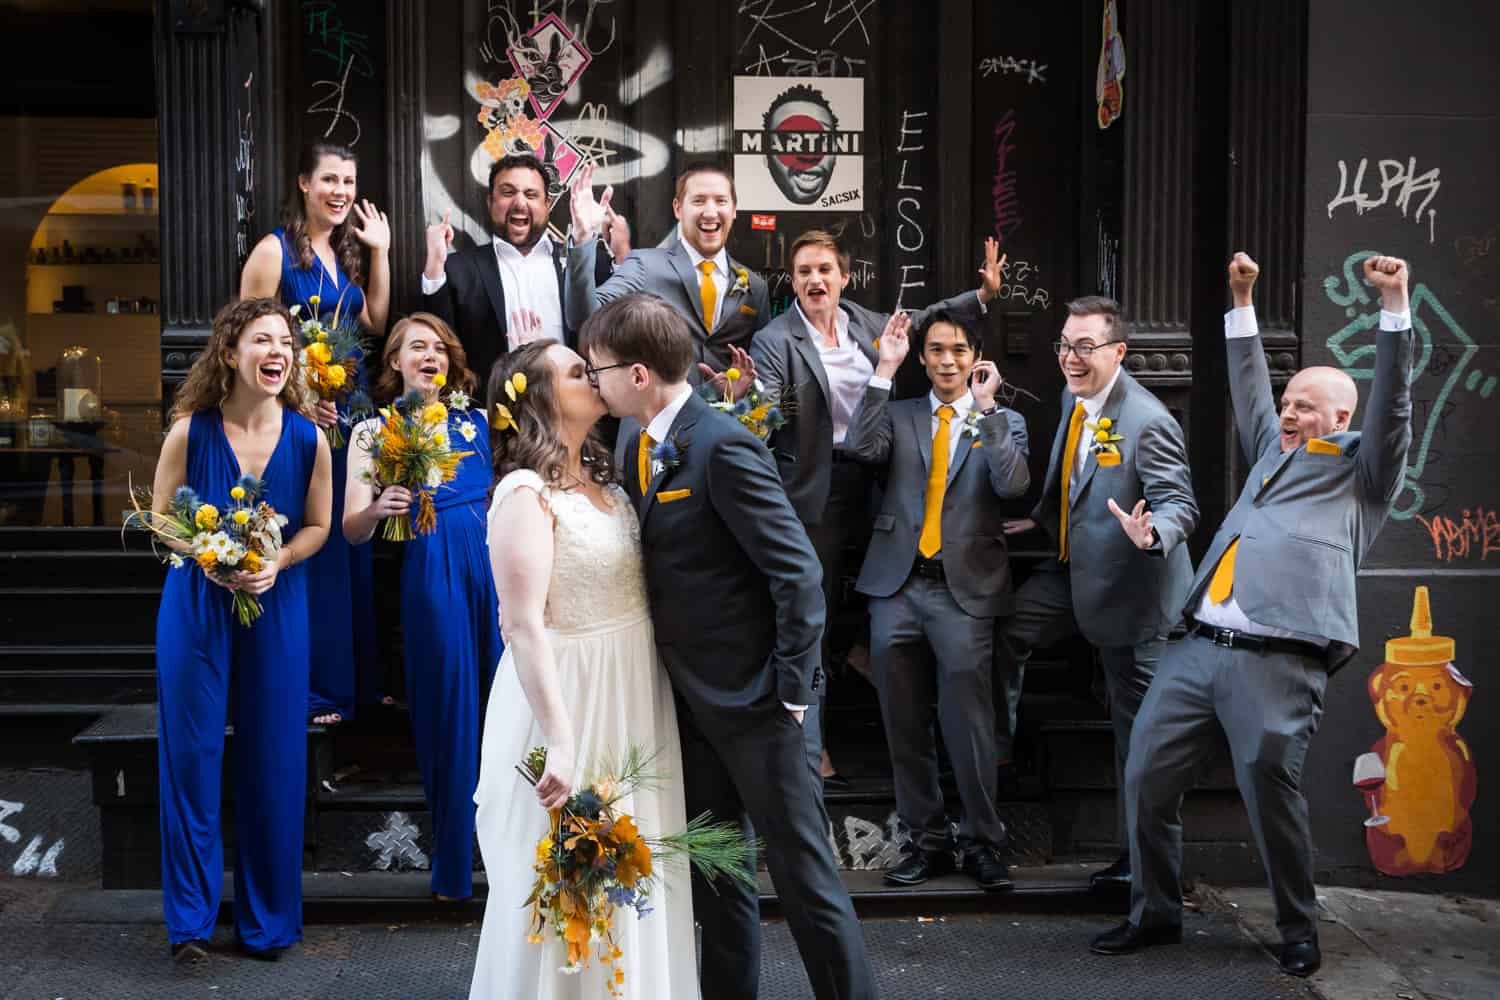 Bridal party cheering as bride and groom kiss for an article on Covid-19 wedding planning